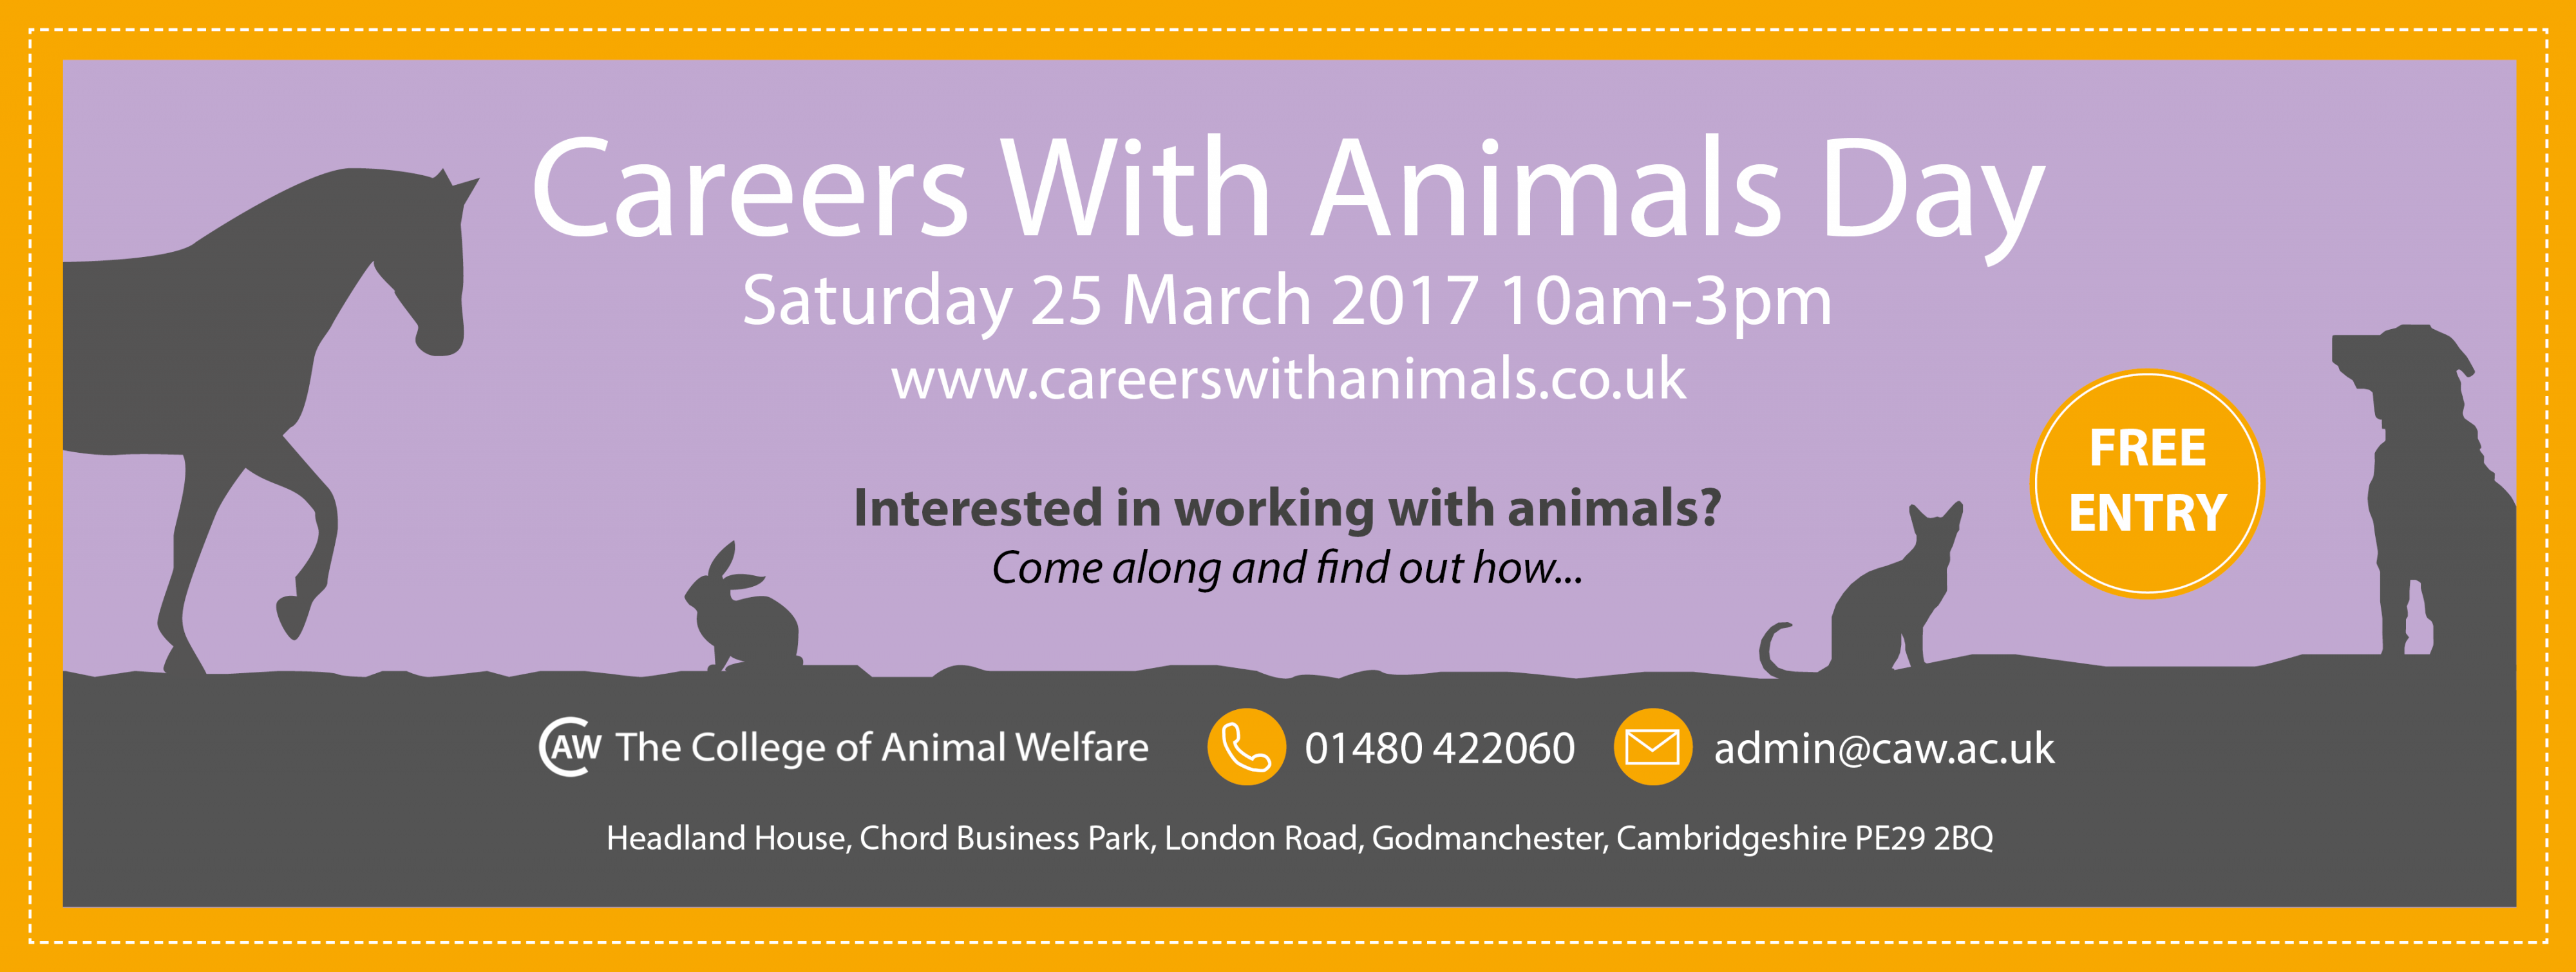 Always wanted to work with animals? Come and find out how! - CAW Blog